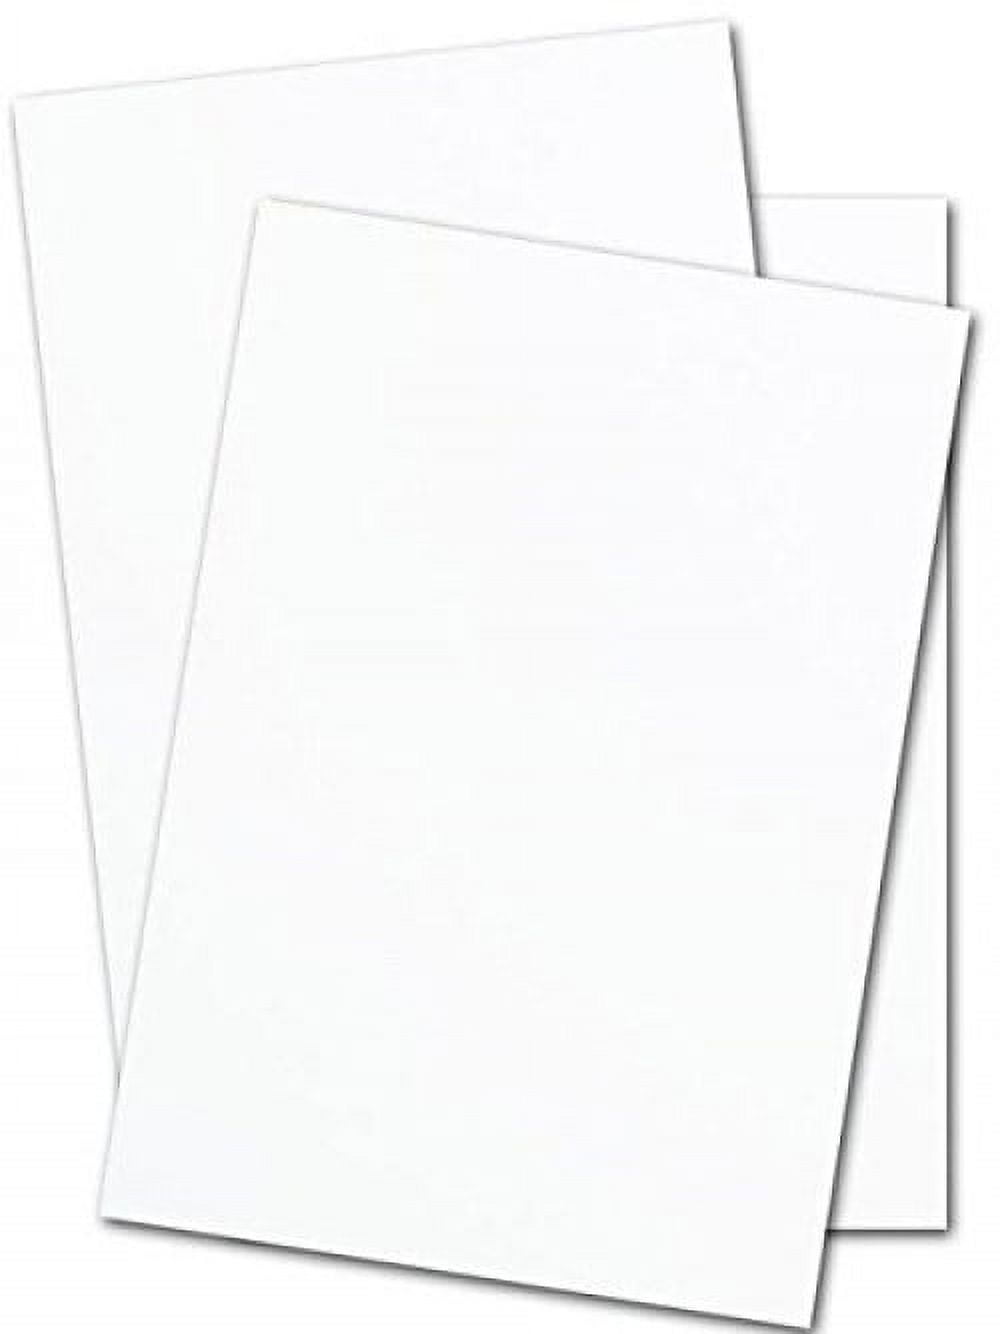 20 Sheets, Heavy White Cardstock - 8.5 x 11, 110 lb (300 gsm)